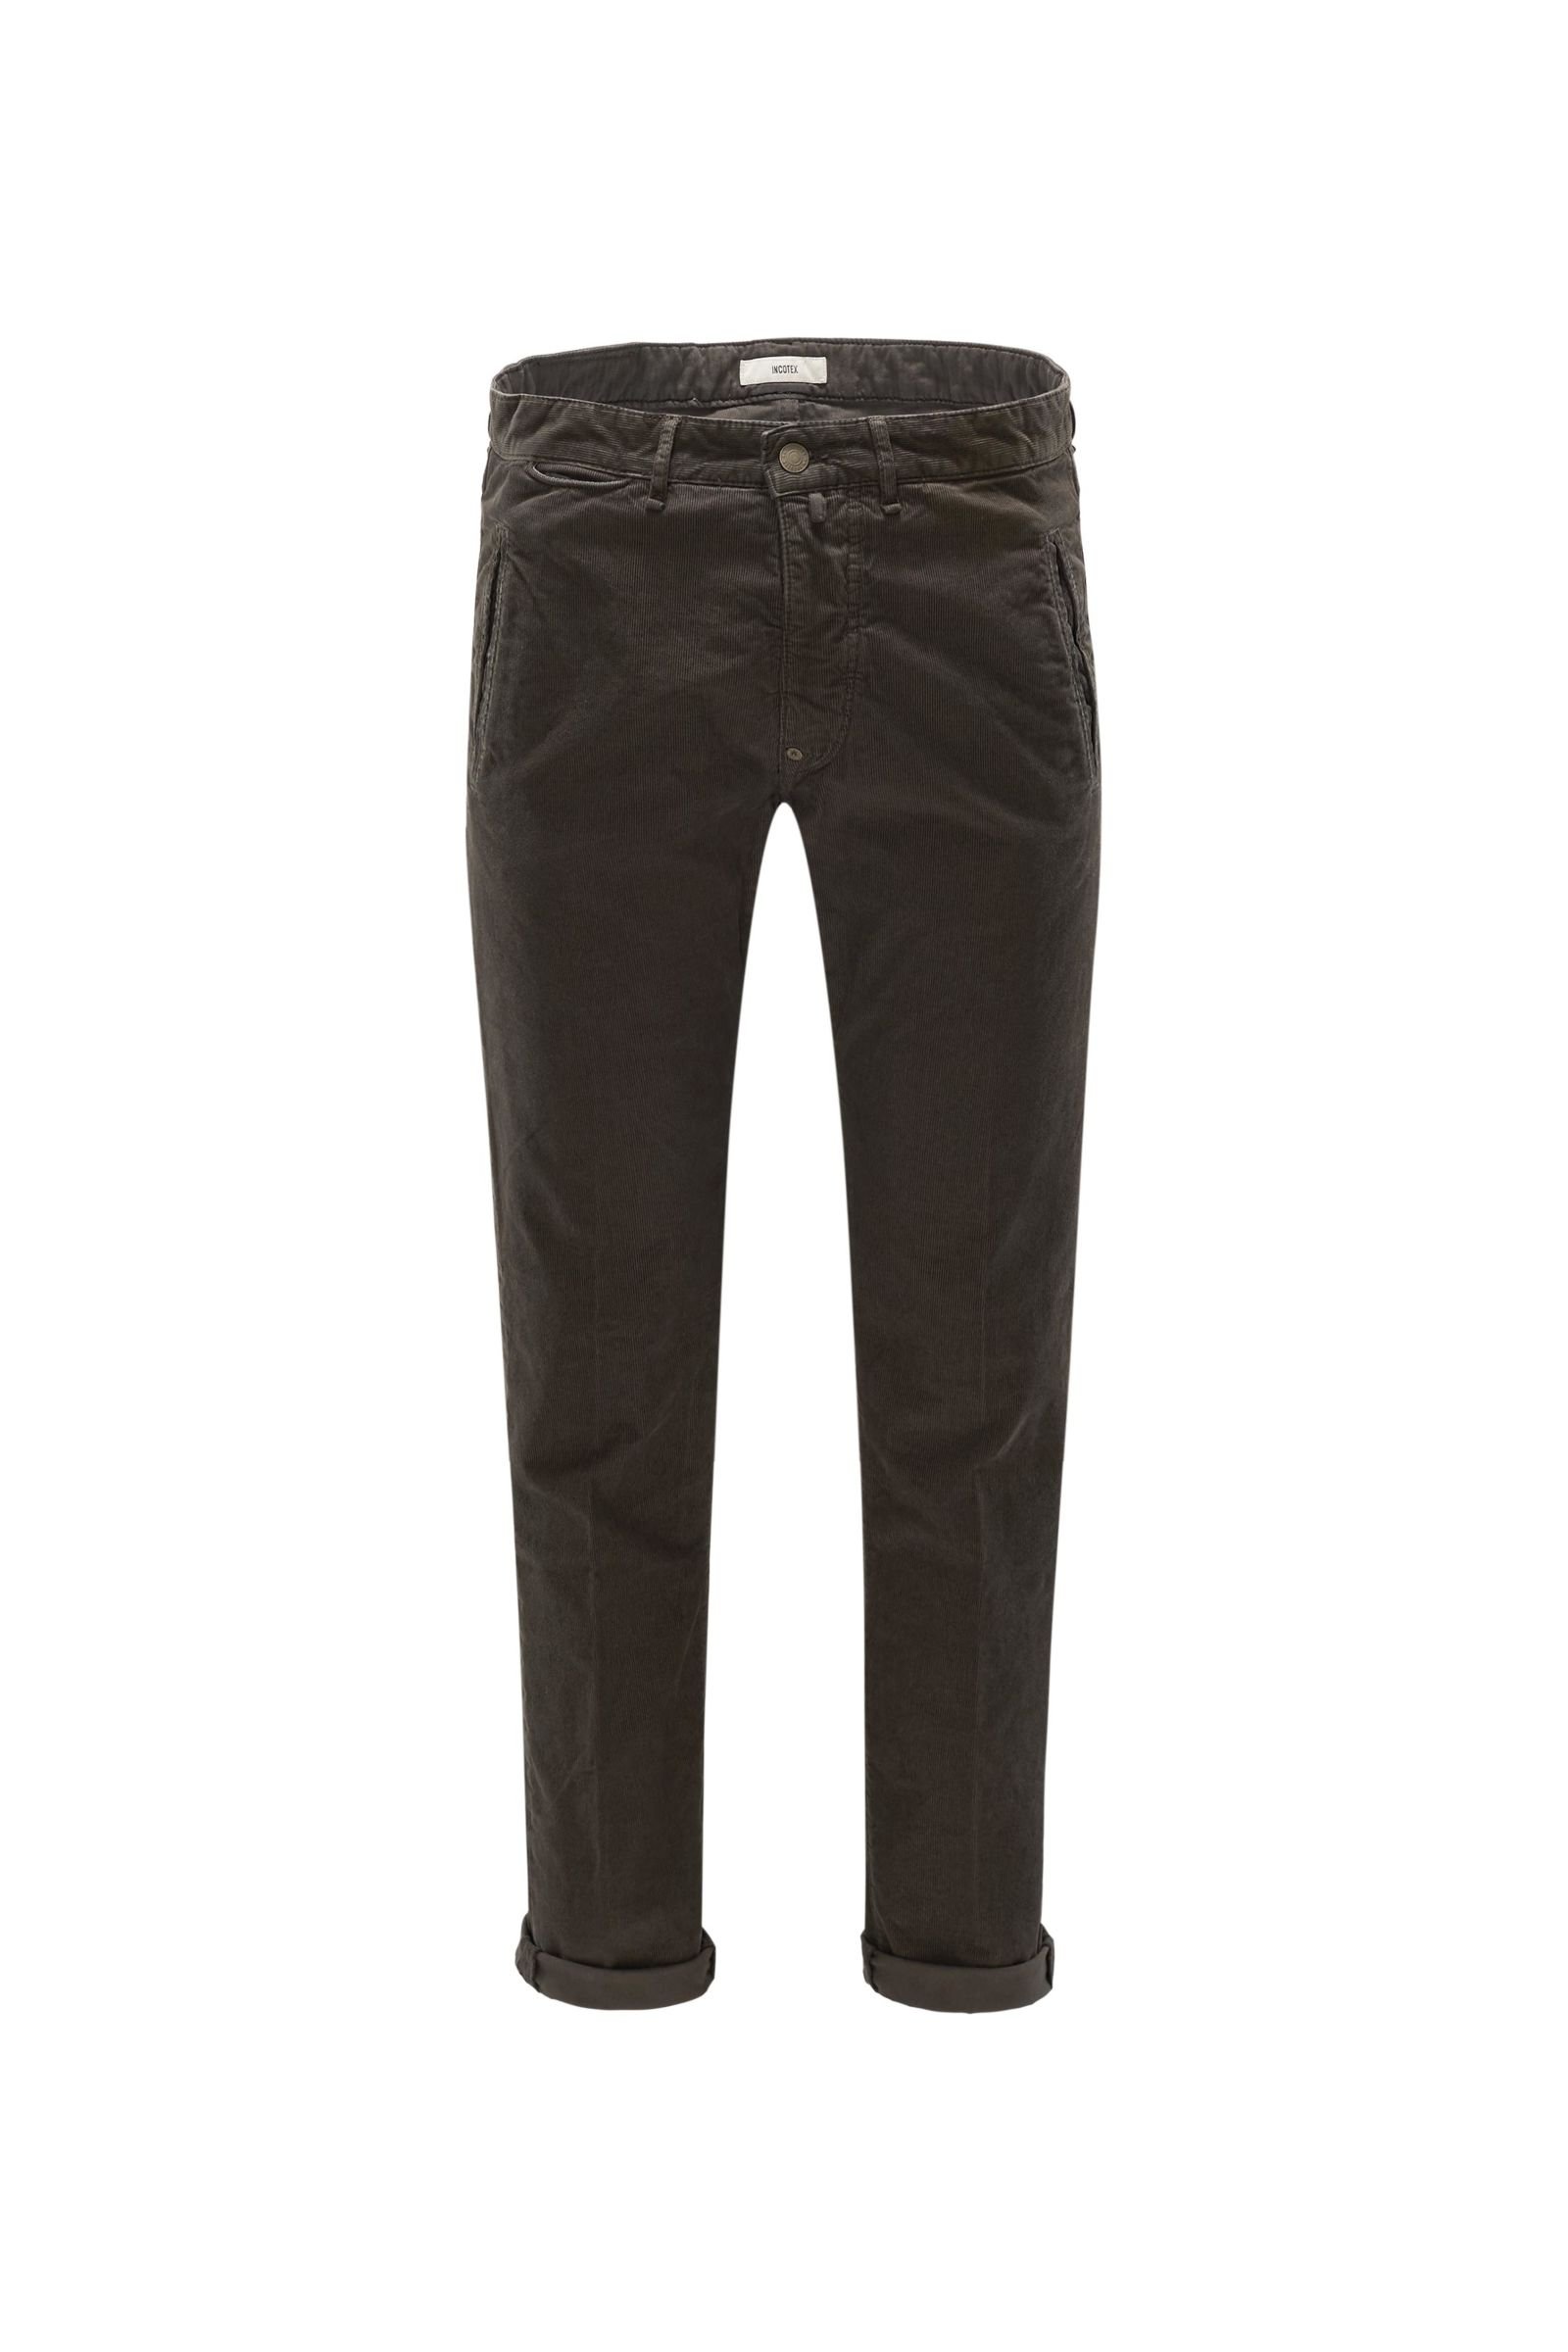 Corduroy trousers 'Taylor Tapered Fit' grey-brown